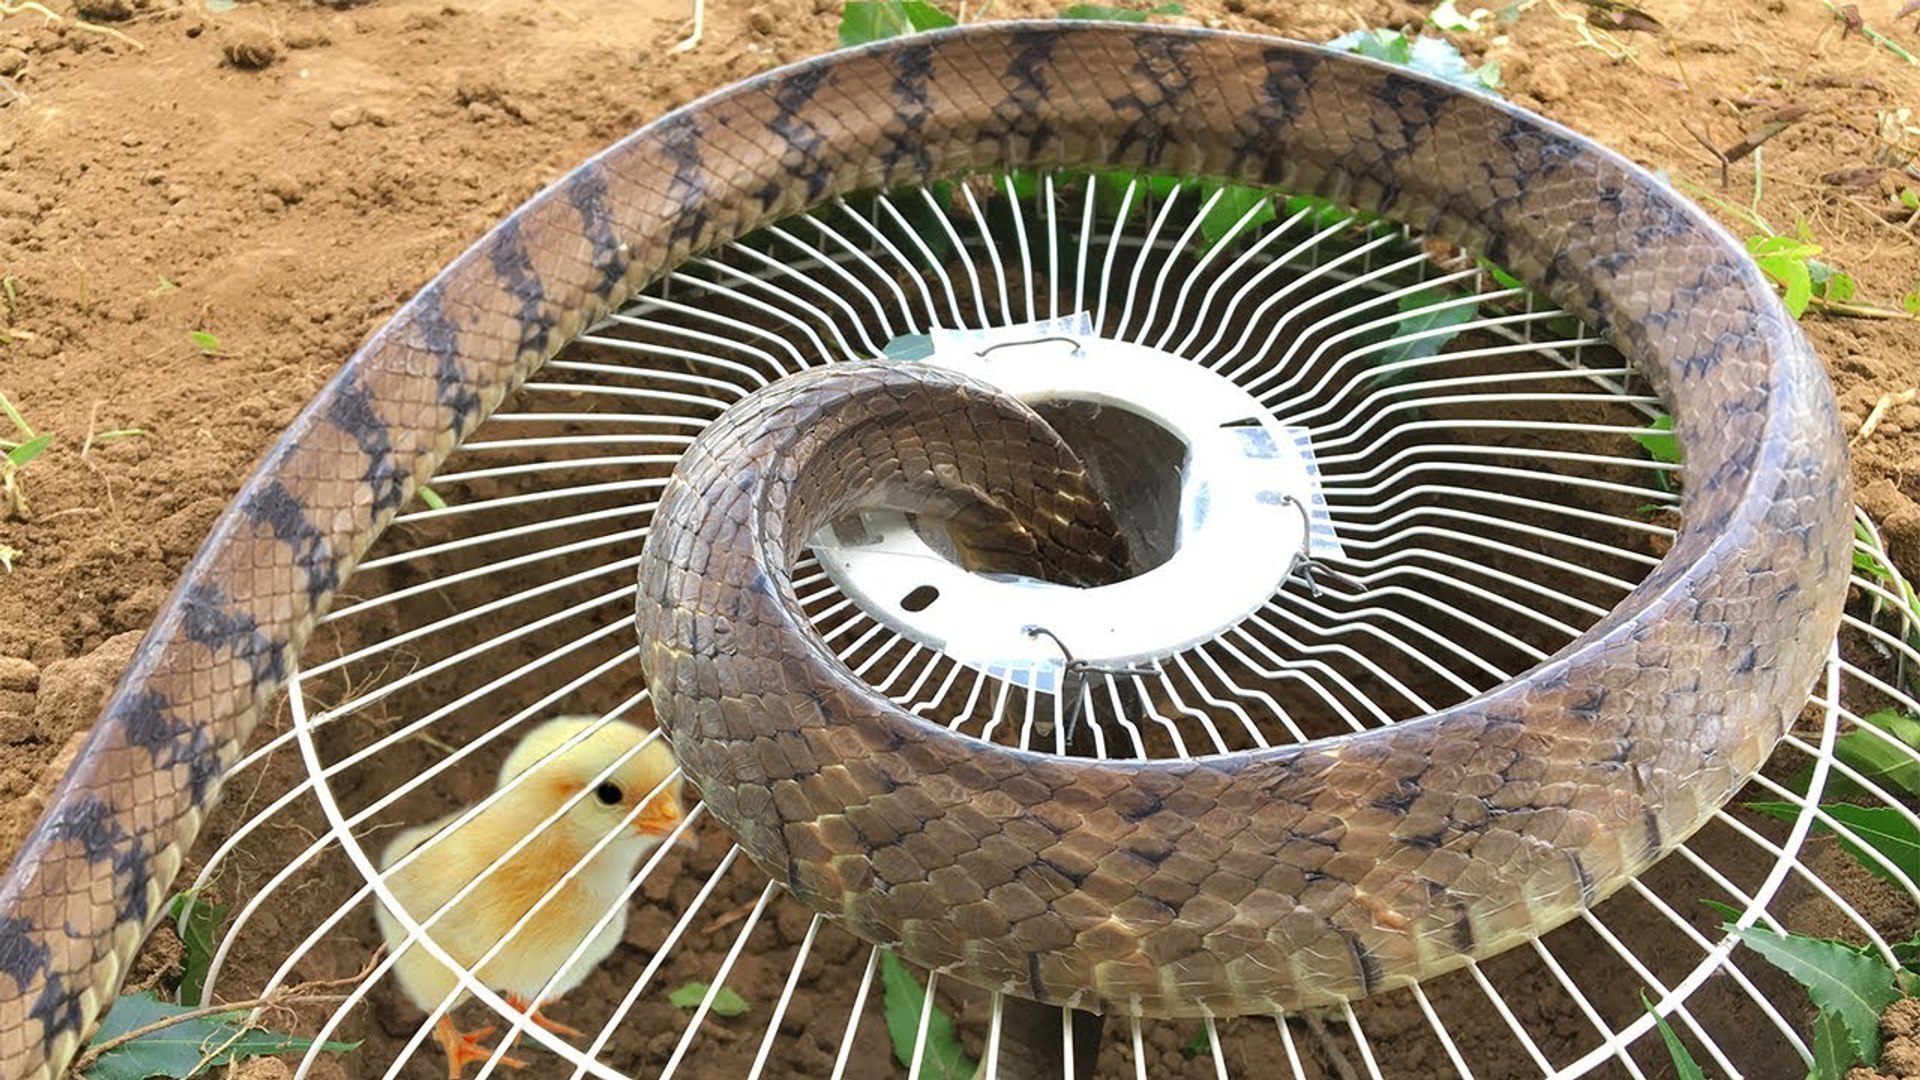 Snake Trap Using Electric Fan Guard and Digging Hole To Catch